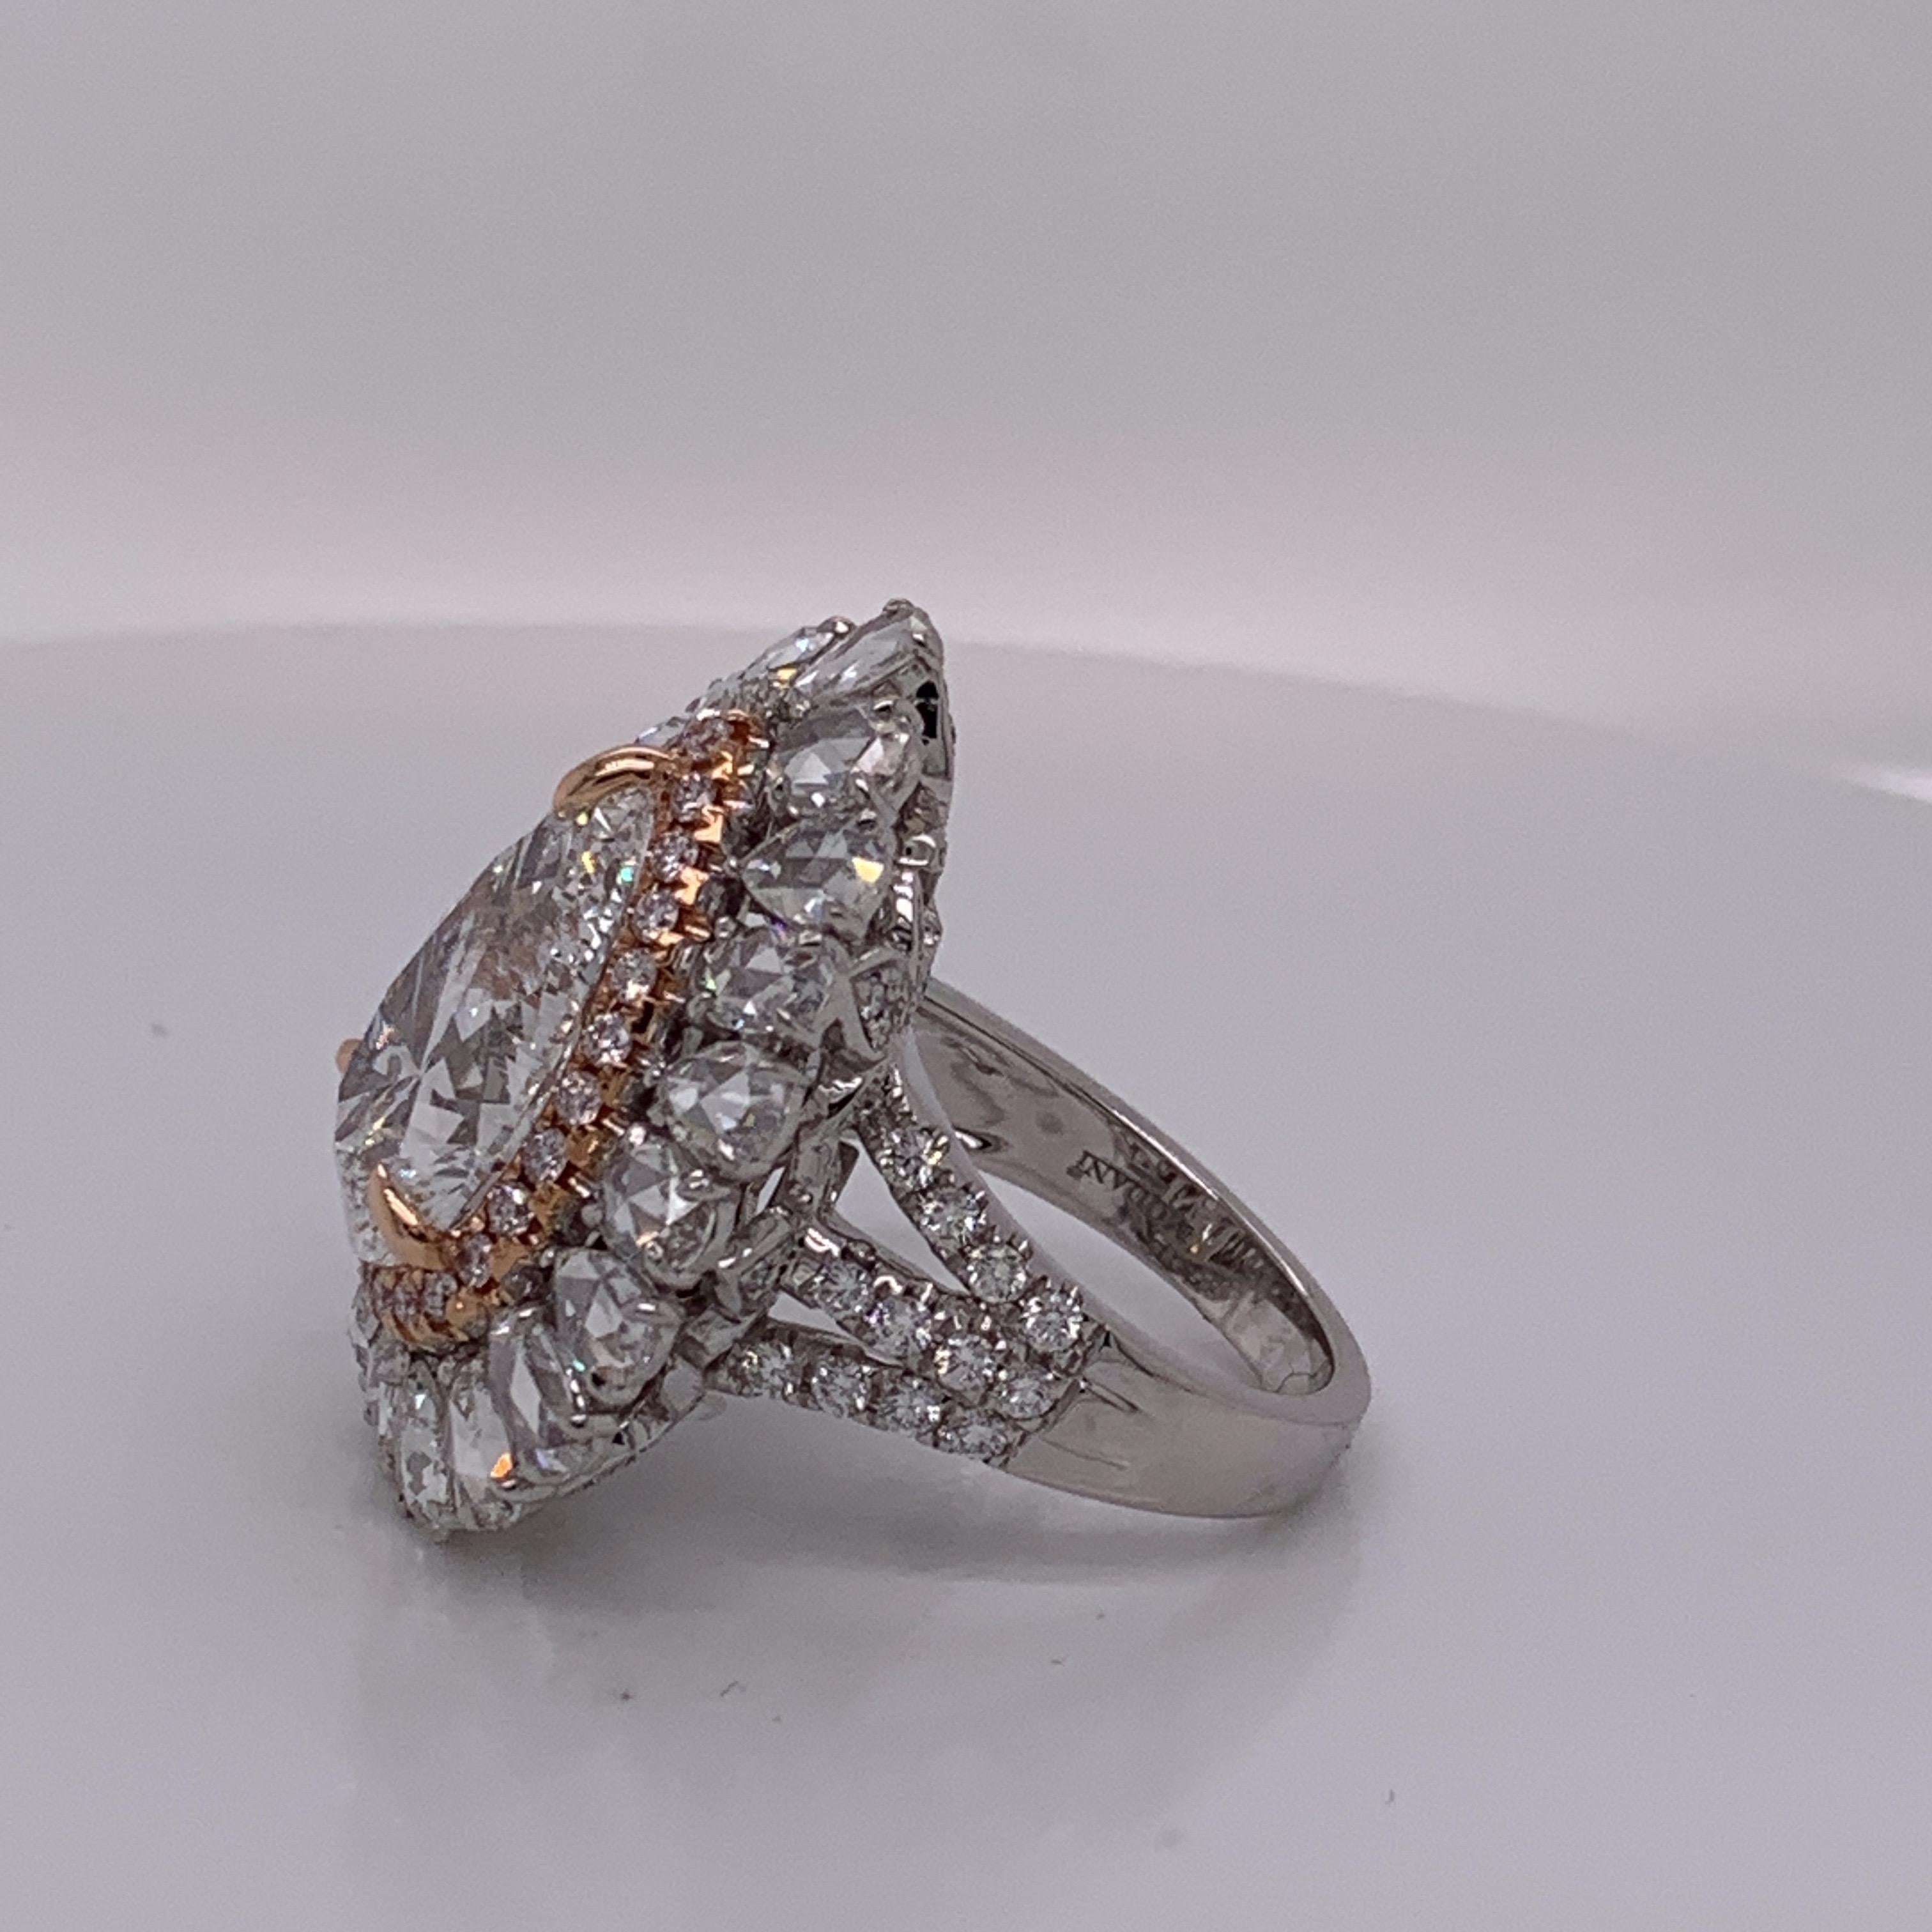 This dazzling white diamond halo ring has a magnificent combination of pink & white diamonds. A pear shape white diamond is set in prongs and framed by pink diamond halo followed by white diamond halo. This exceptional piece is finished with highly